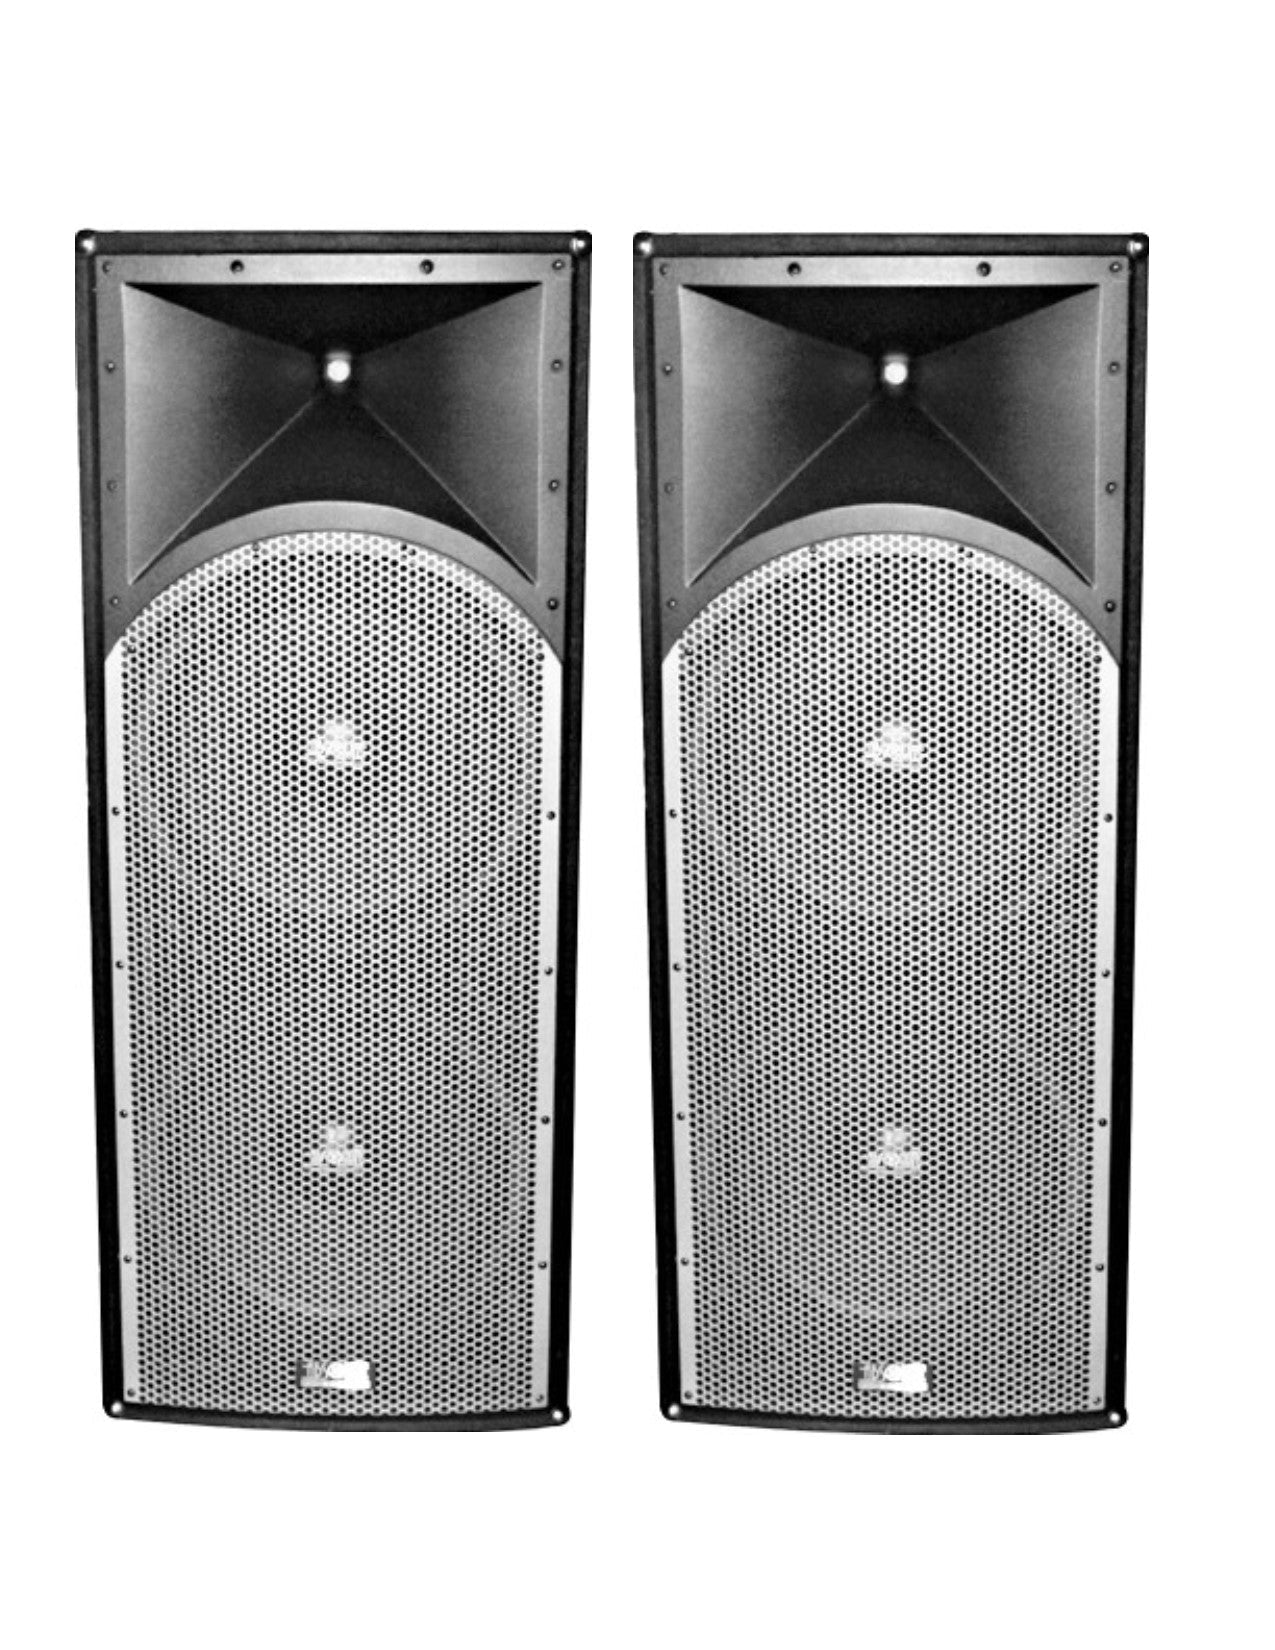 2 Absolute PROS212 Dual 12" Speaker<br/> Professional Series Dual 12" 3-Way 3000 Watts DJ PA PRO Audio Passive Speaker with Titanium Compression Driver for Live Sound, Karaoke, Bar, Church